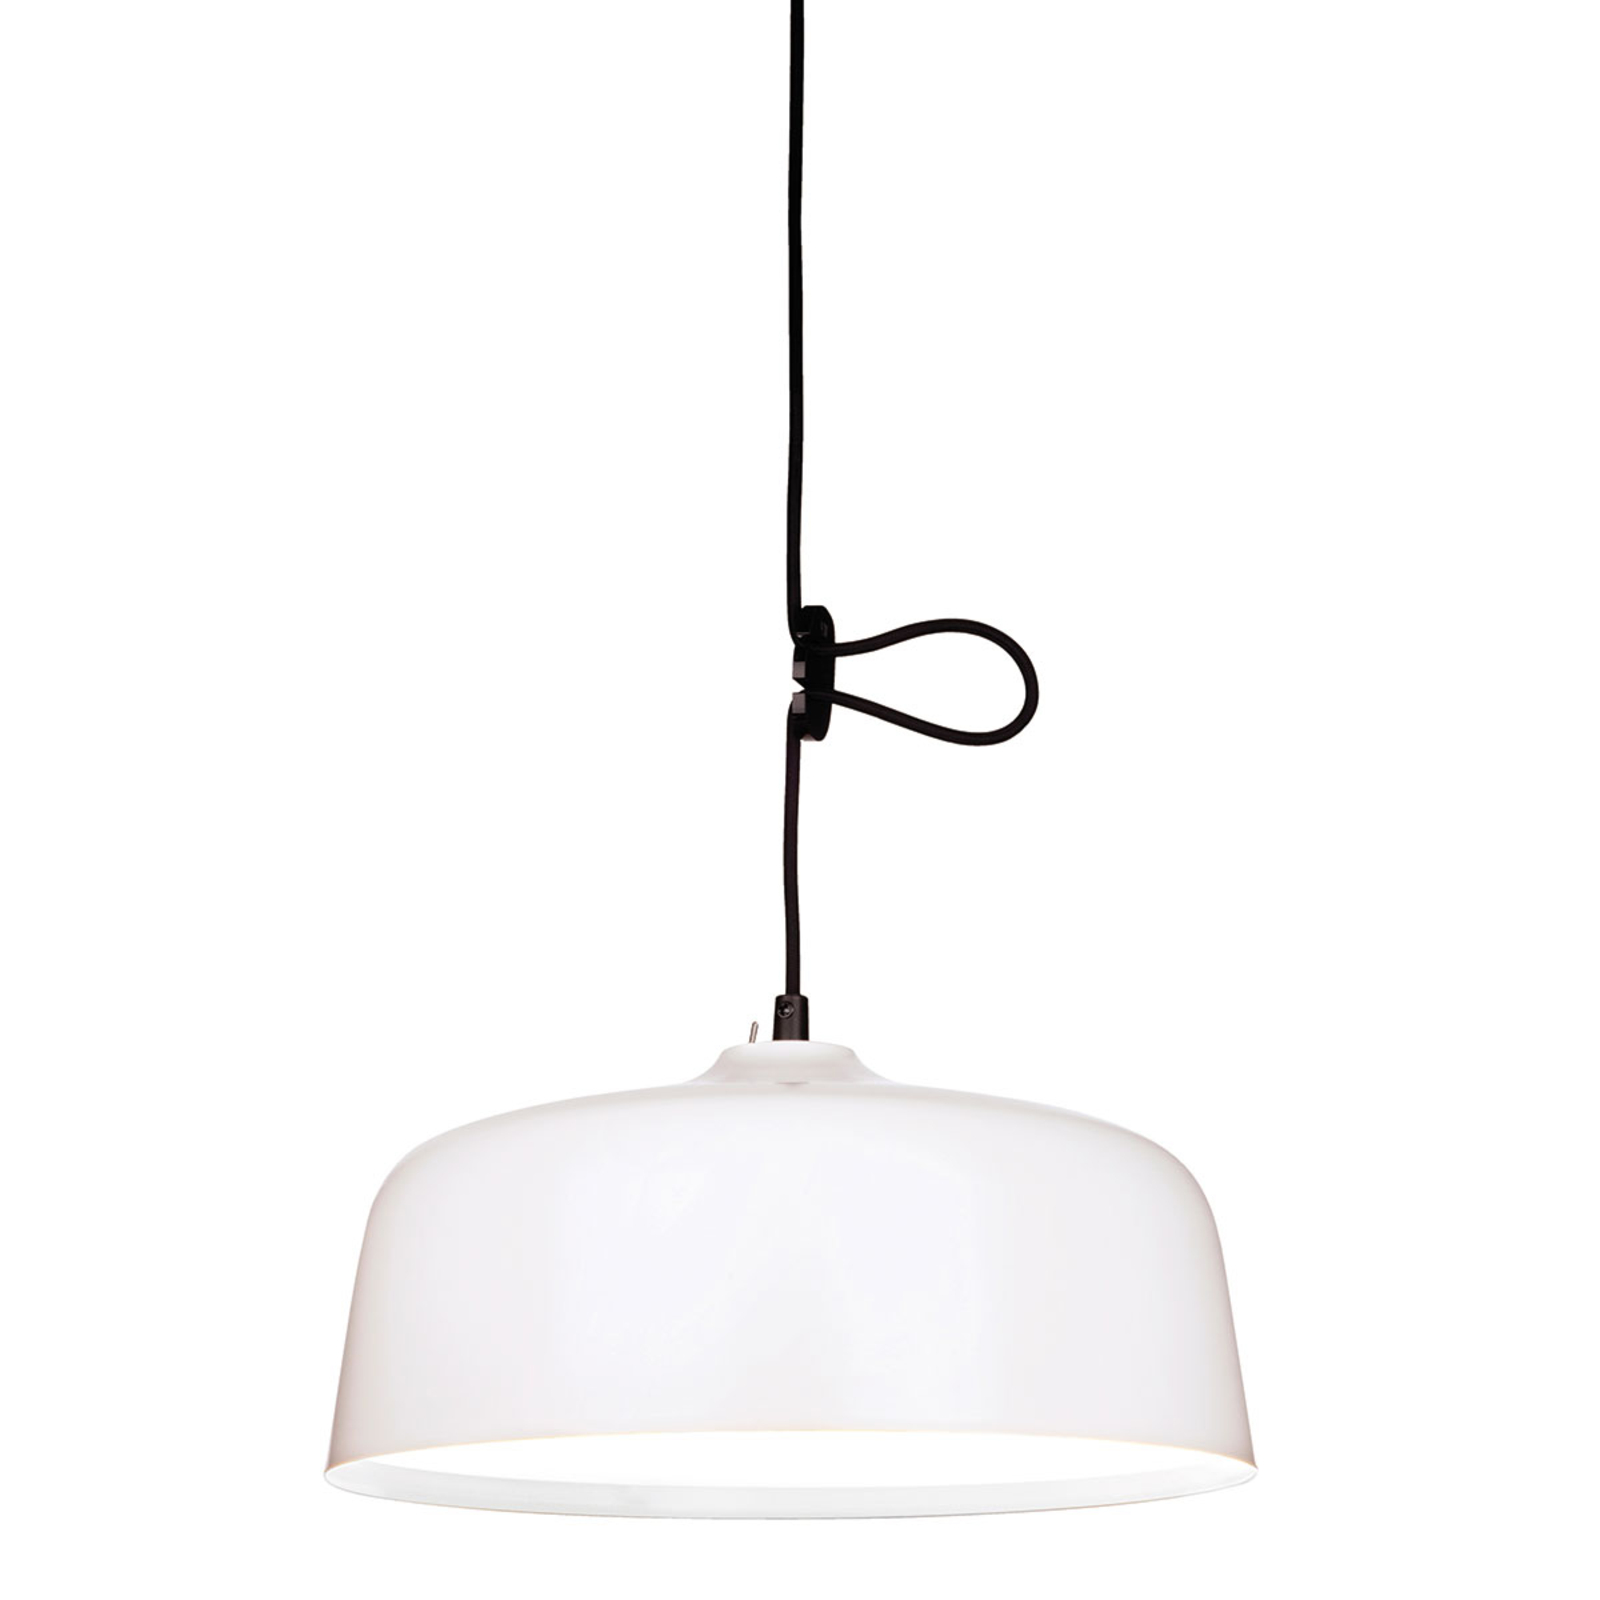 Innolux Candeo hanglamp wit